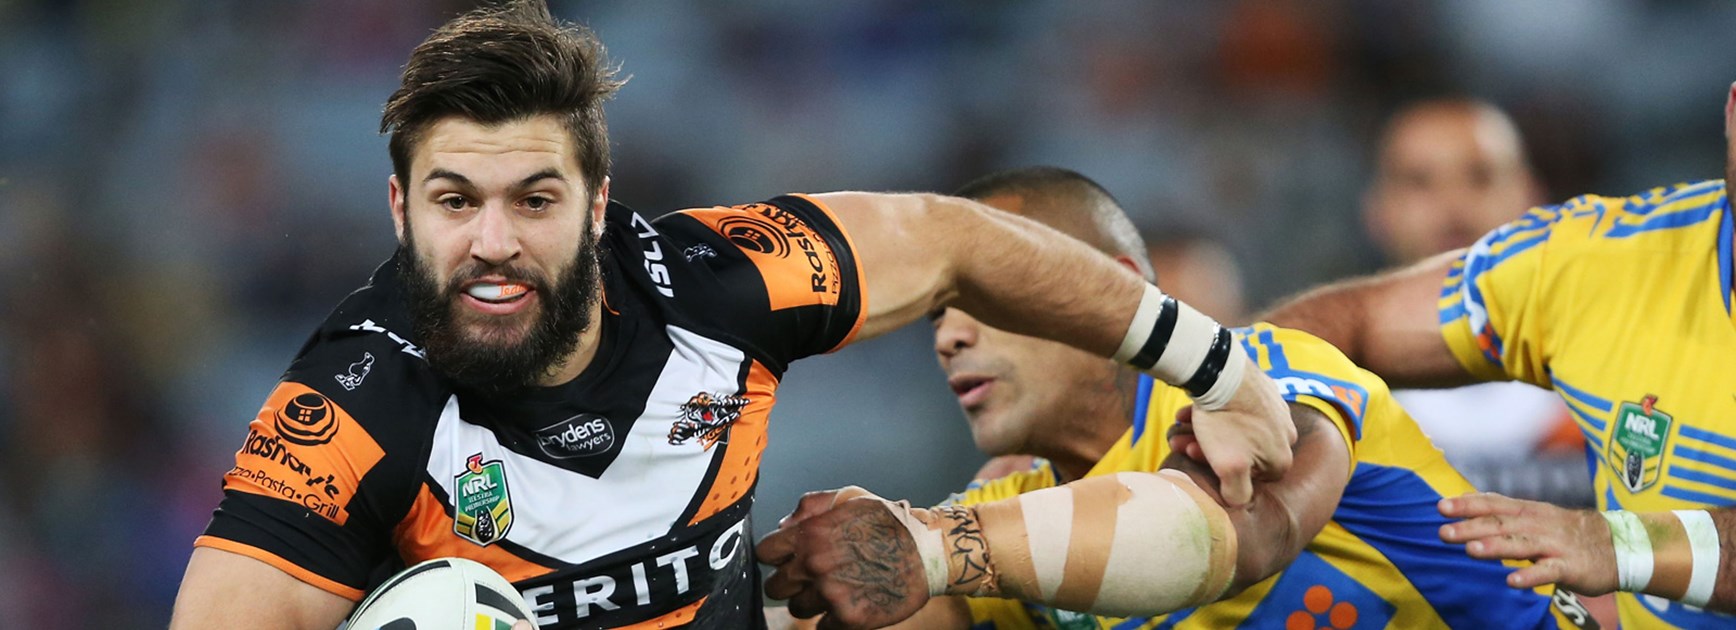 Tigers fullback James Tedesco was powerful in a losing side on Monday night.